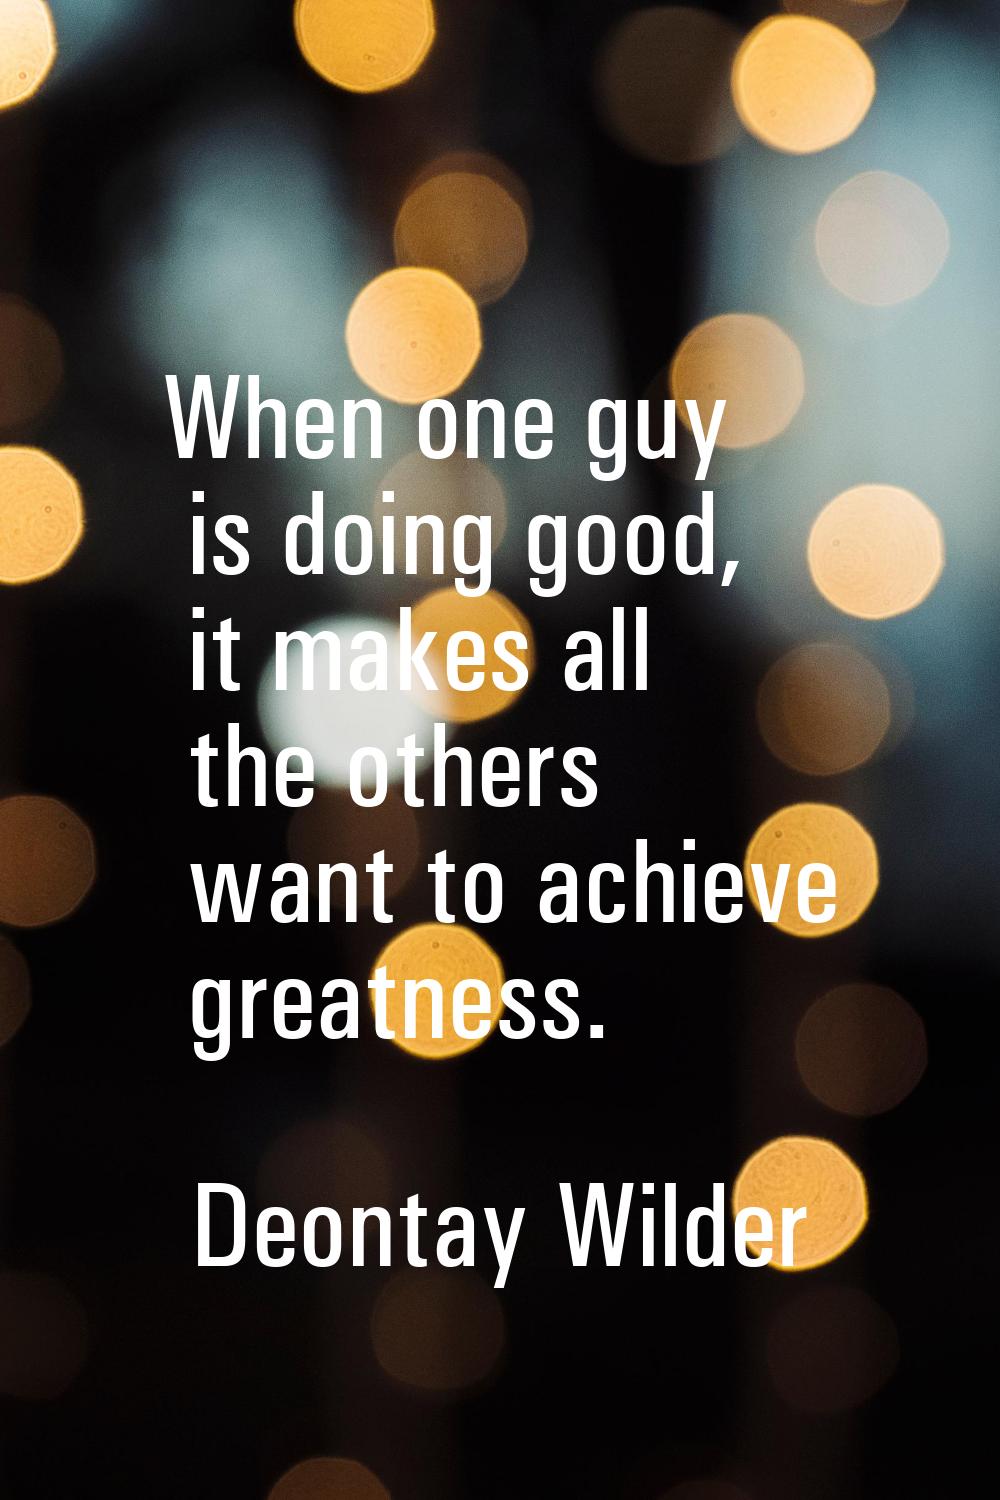 When one guy is doing good, it makes all the others want to achieve greatness.